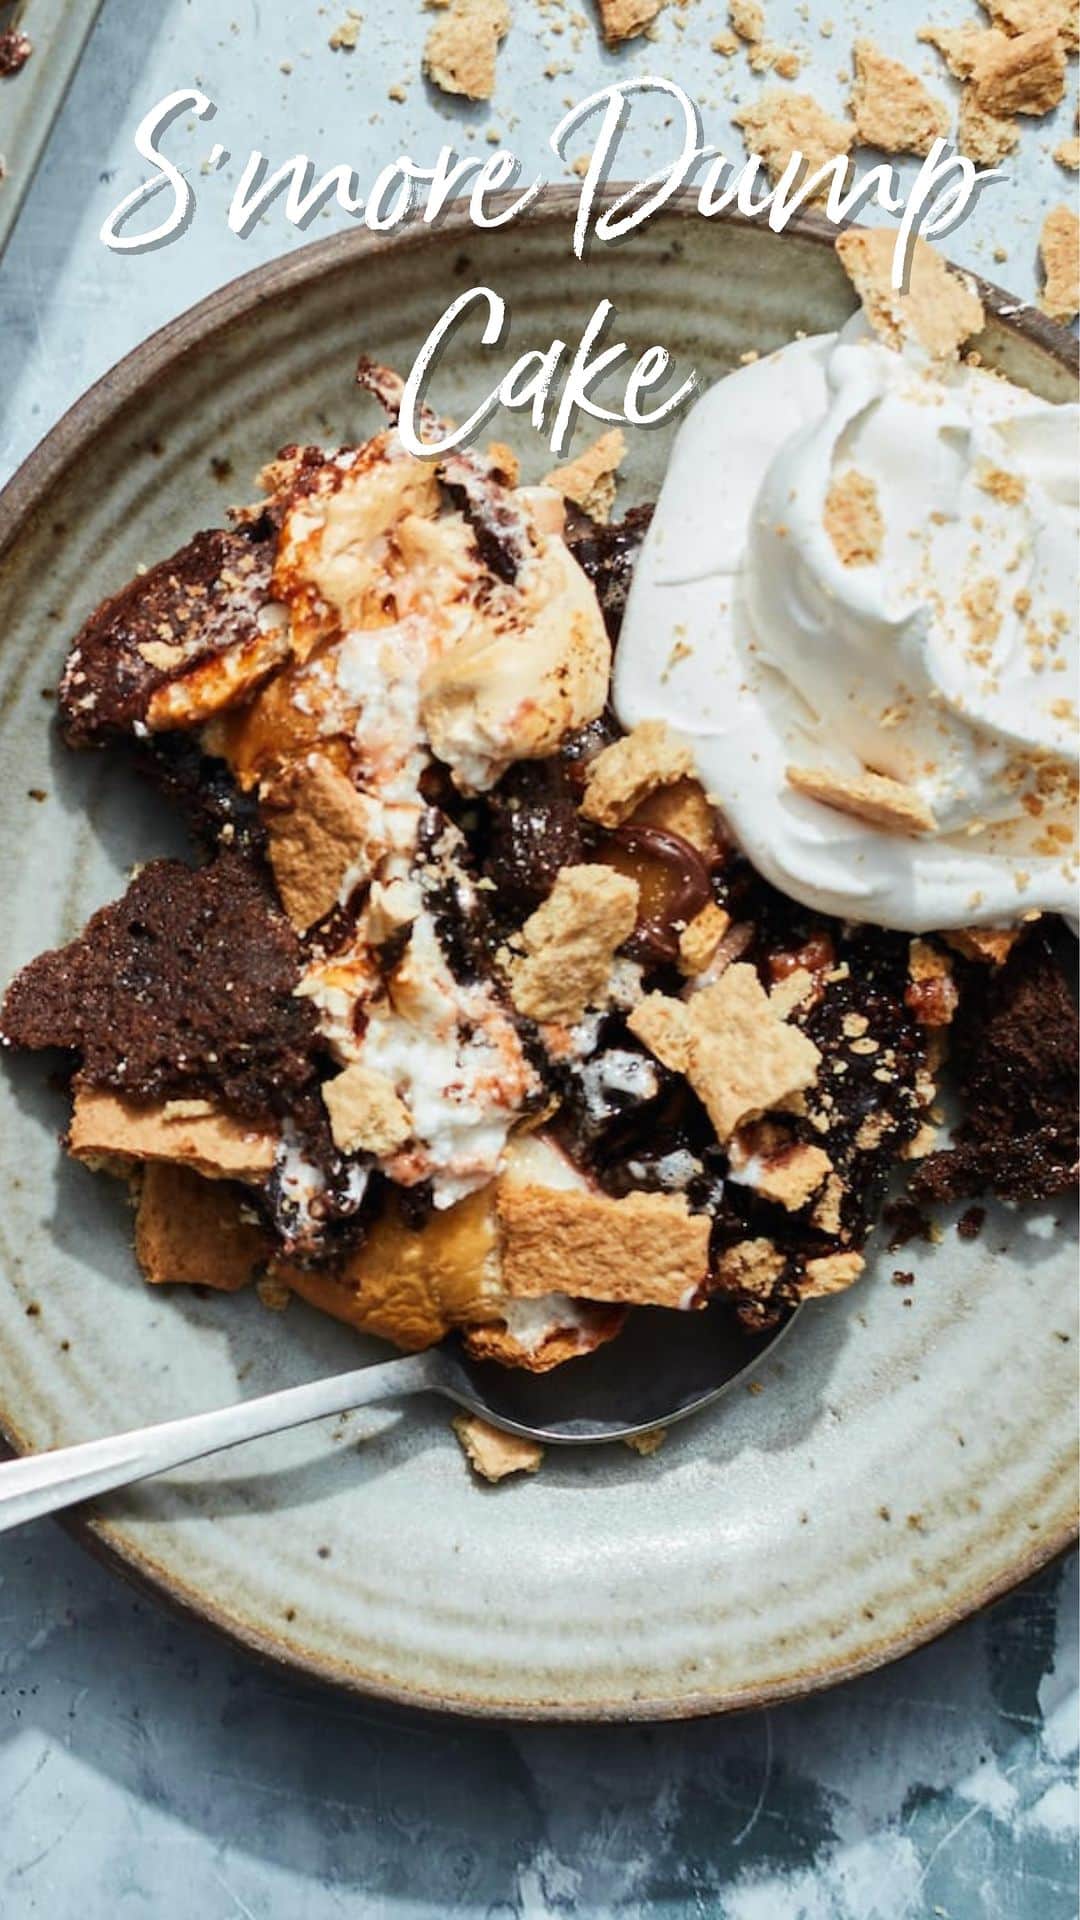 Gaby Dalkinのインスタグラム：「S’mores Dump Cakes. THIS IS EVERYTHING! Grab the recipe link in my profile https://whatsgabycooking.com/smore-butterscotch-caramel-dump-cake/」